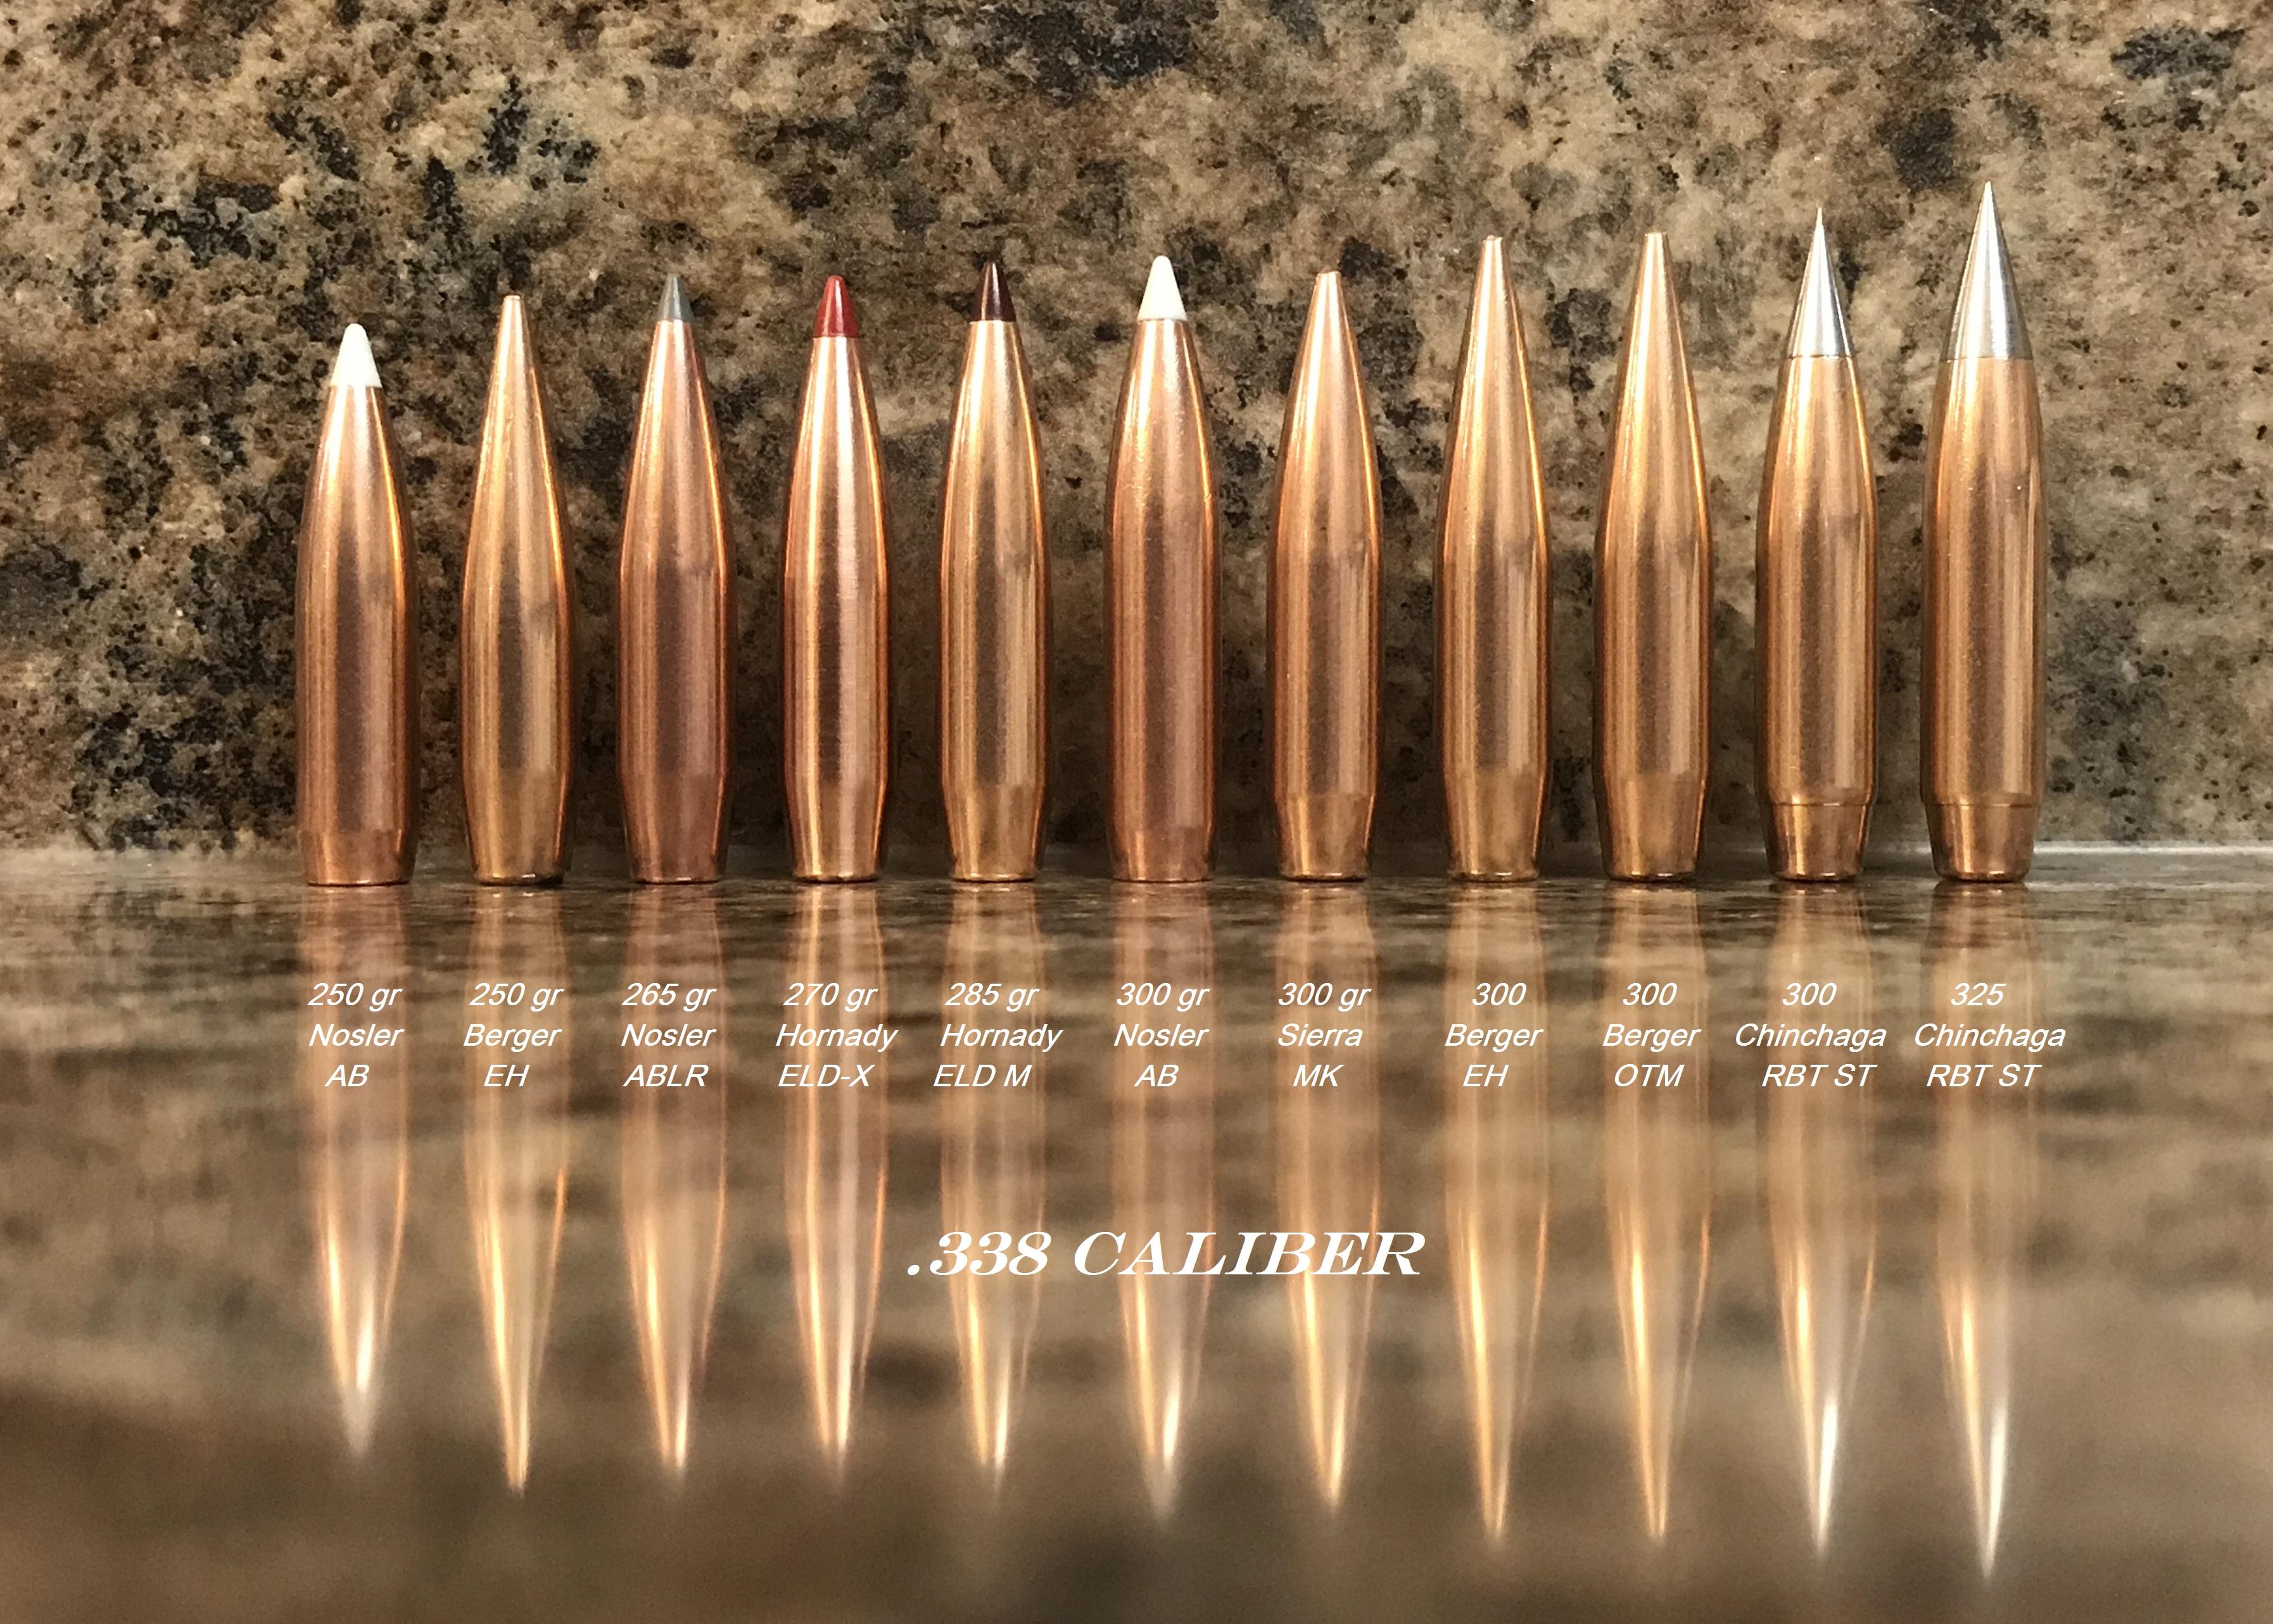 338 caliber - jacketed lead core bullets.jpg